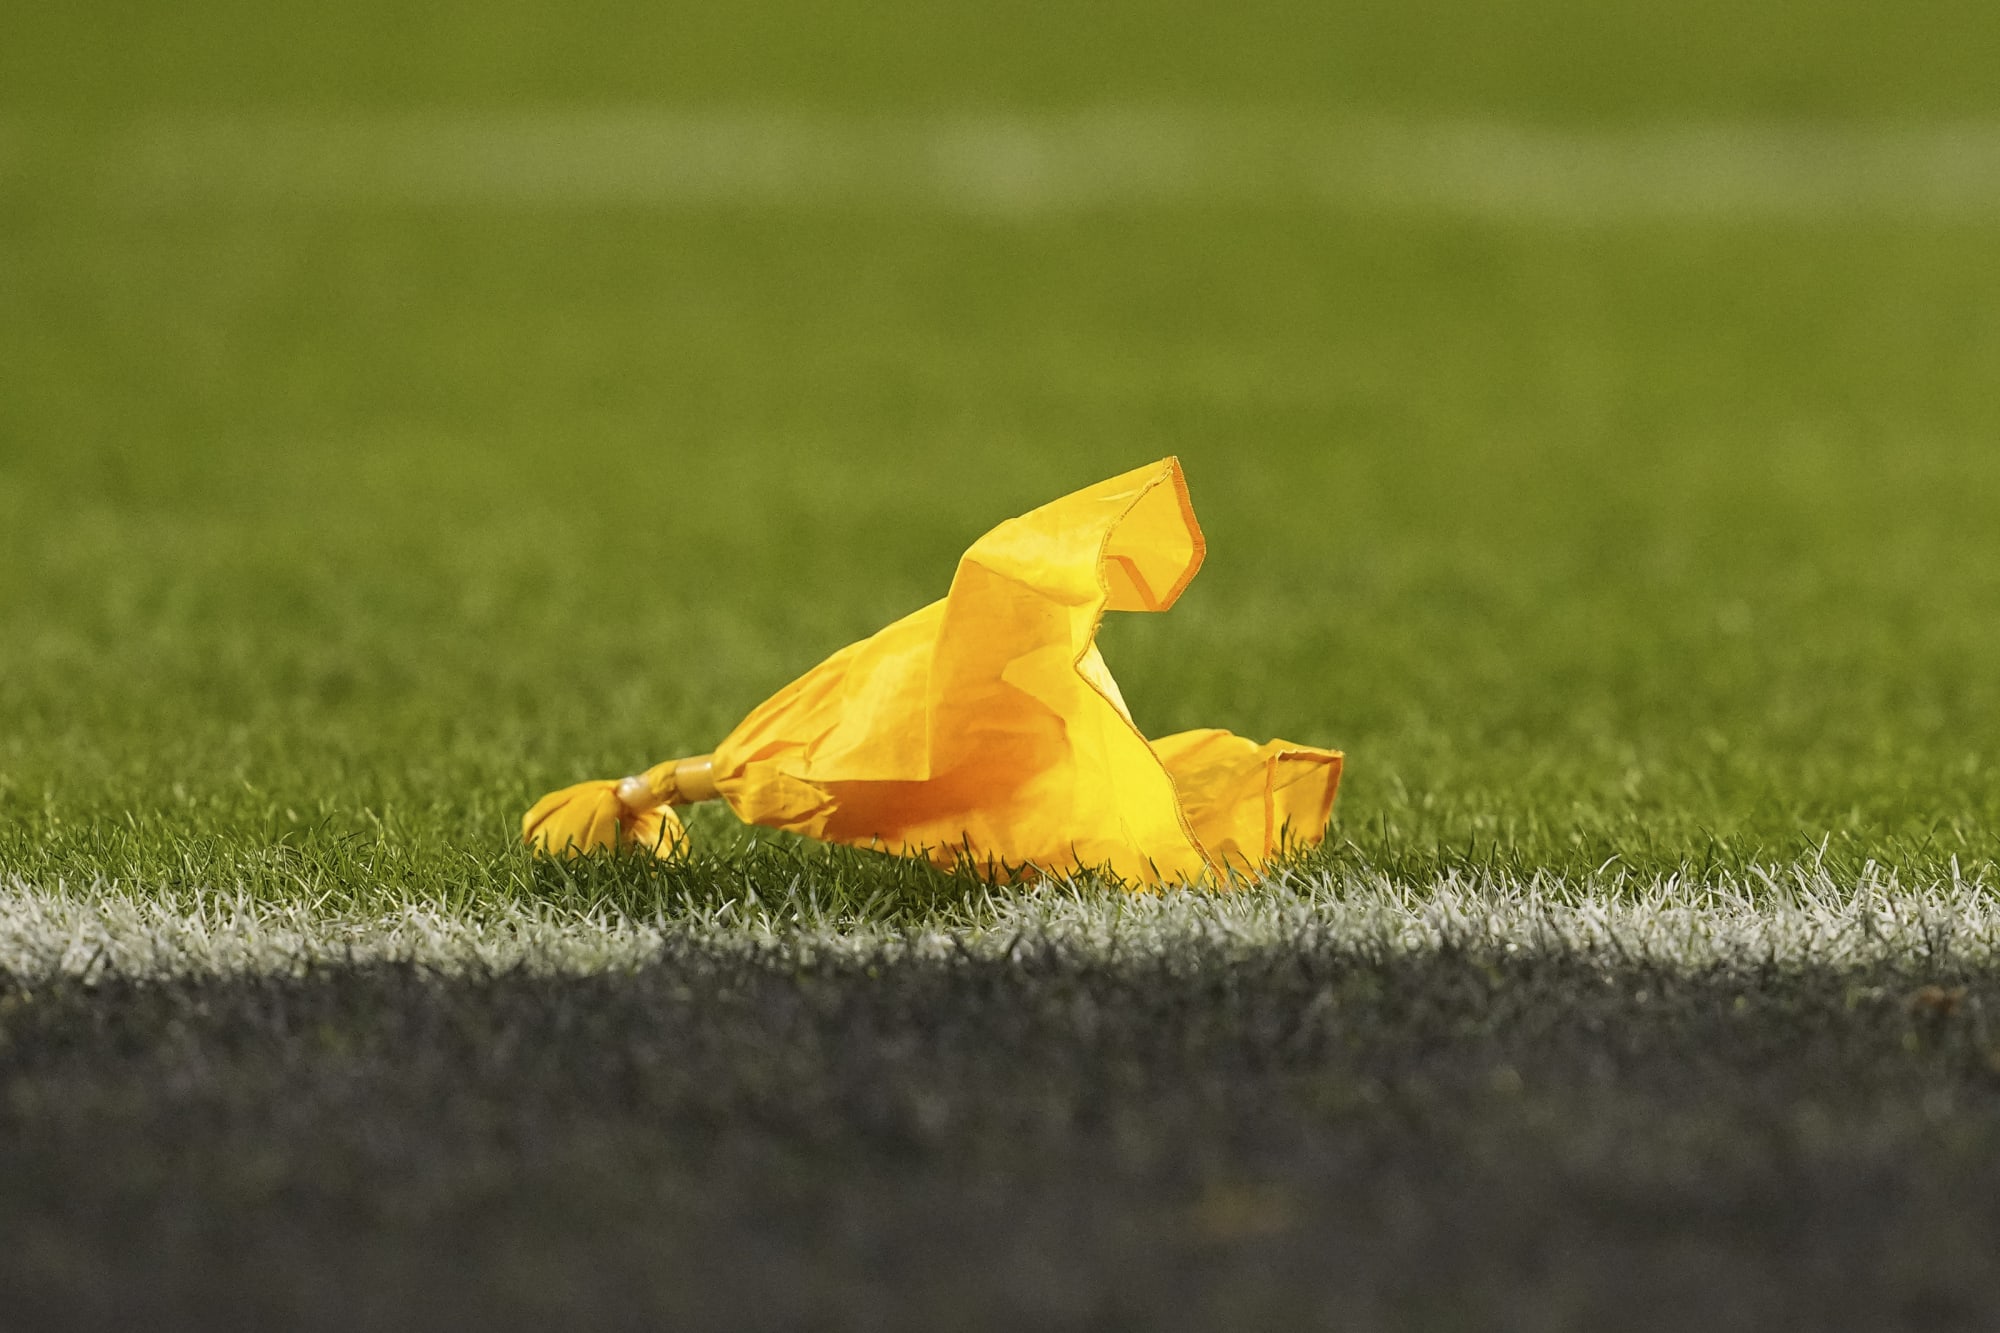 NFL Referee Ron Torbert’s impact on the over/under in AFC championship game